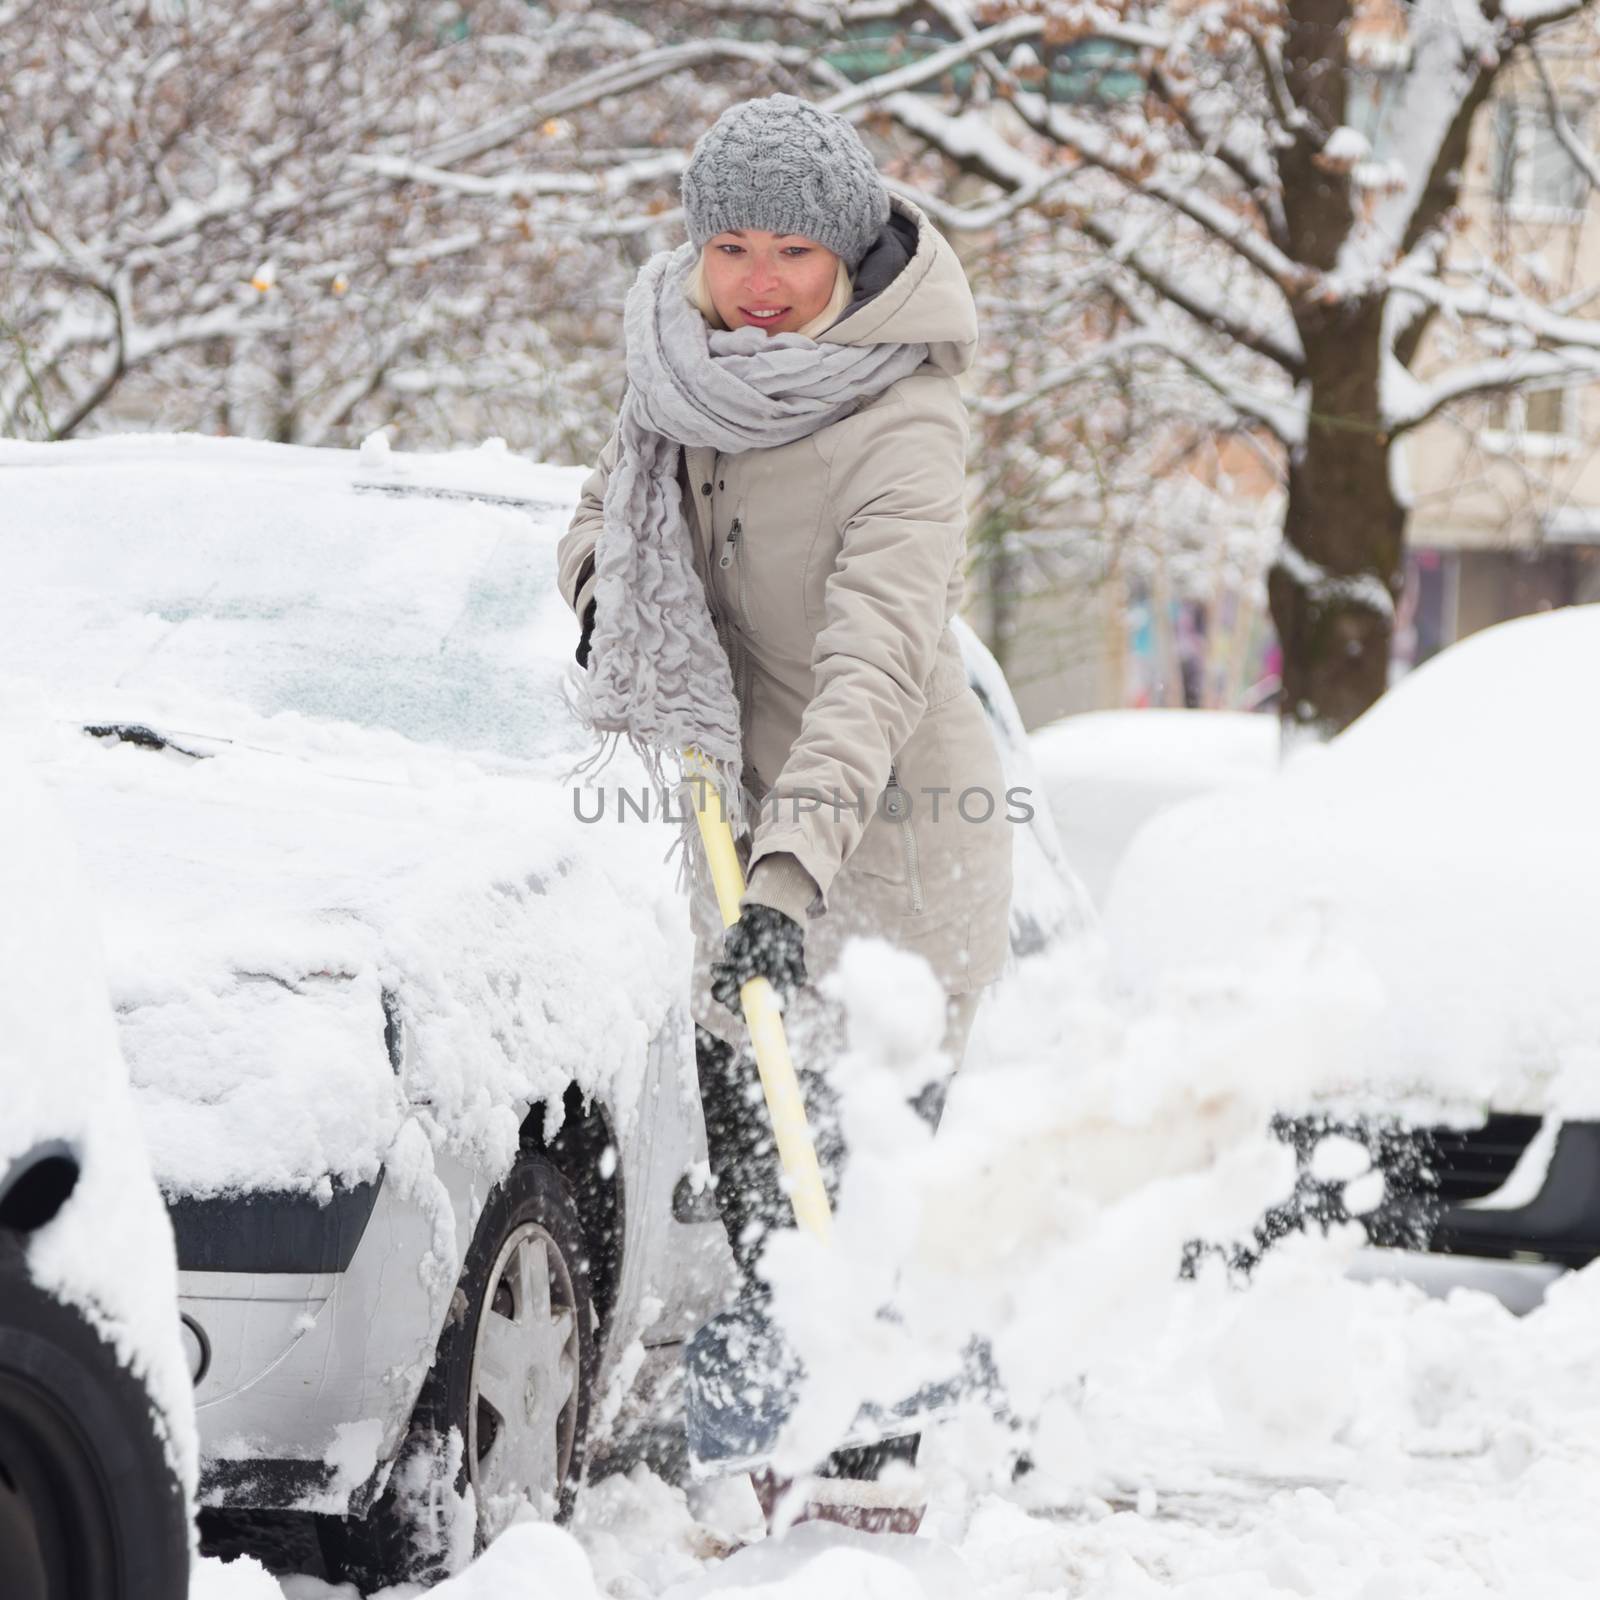 Independent woman shoveling her parking lot after a winter snowstorm.